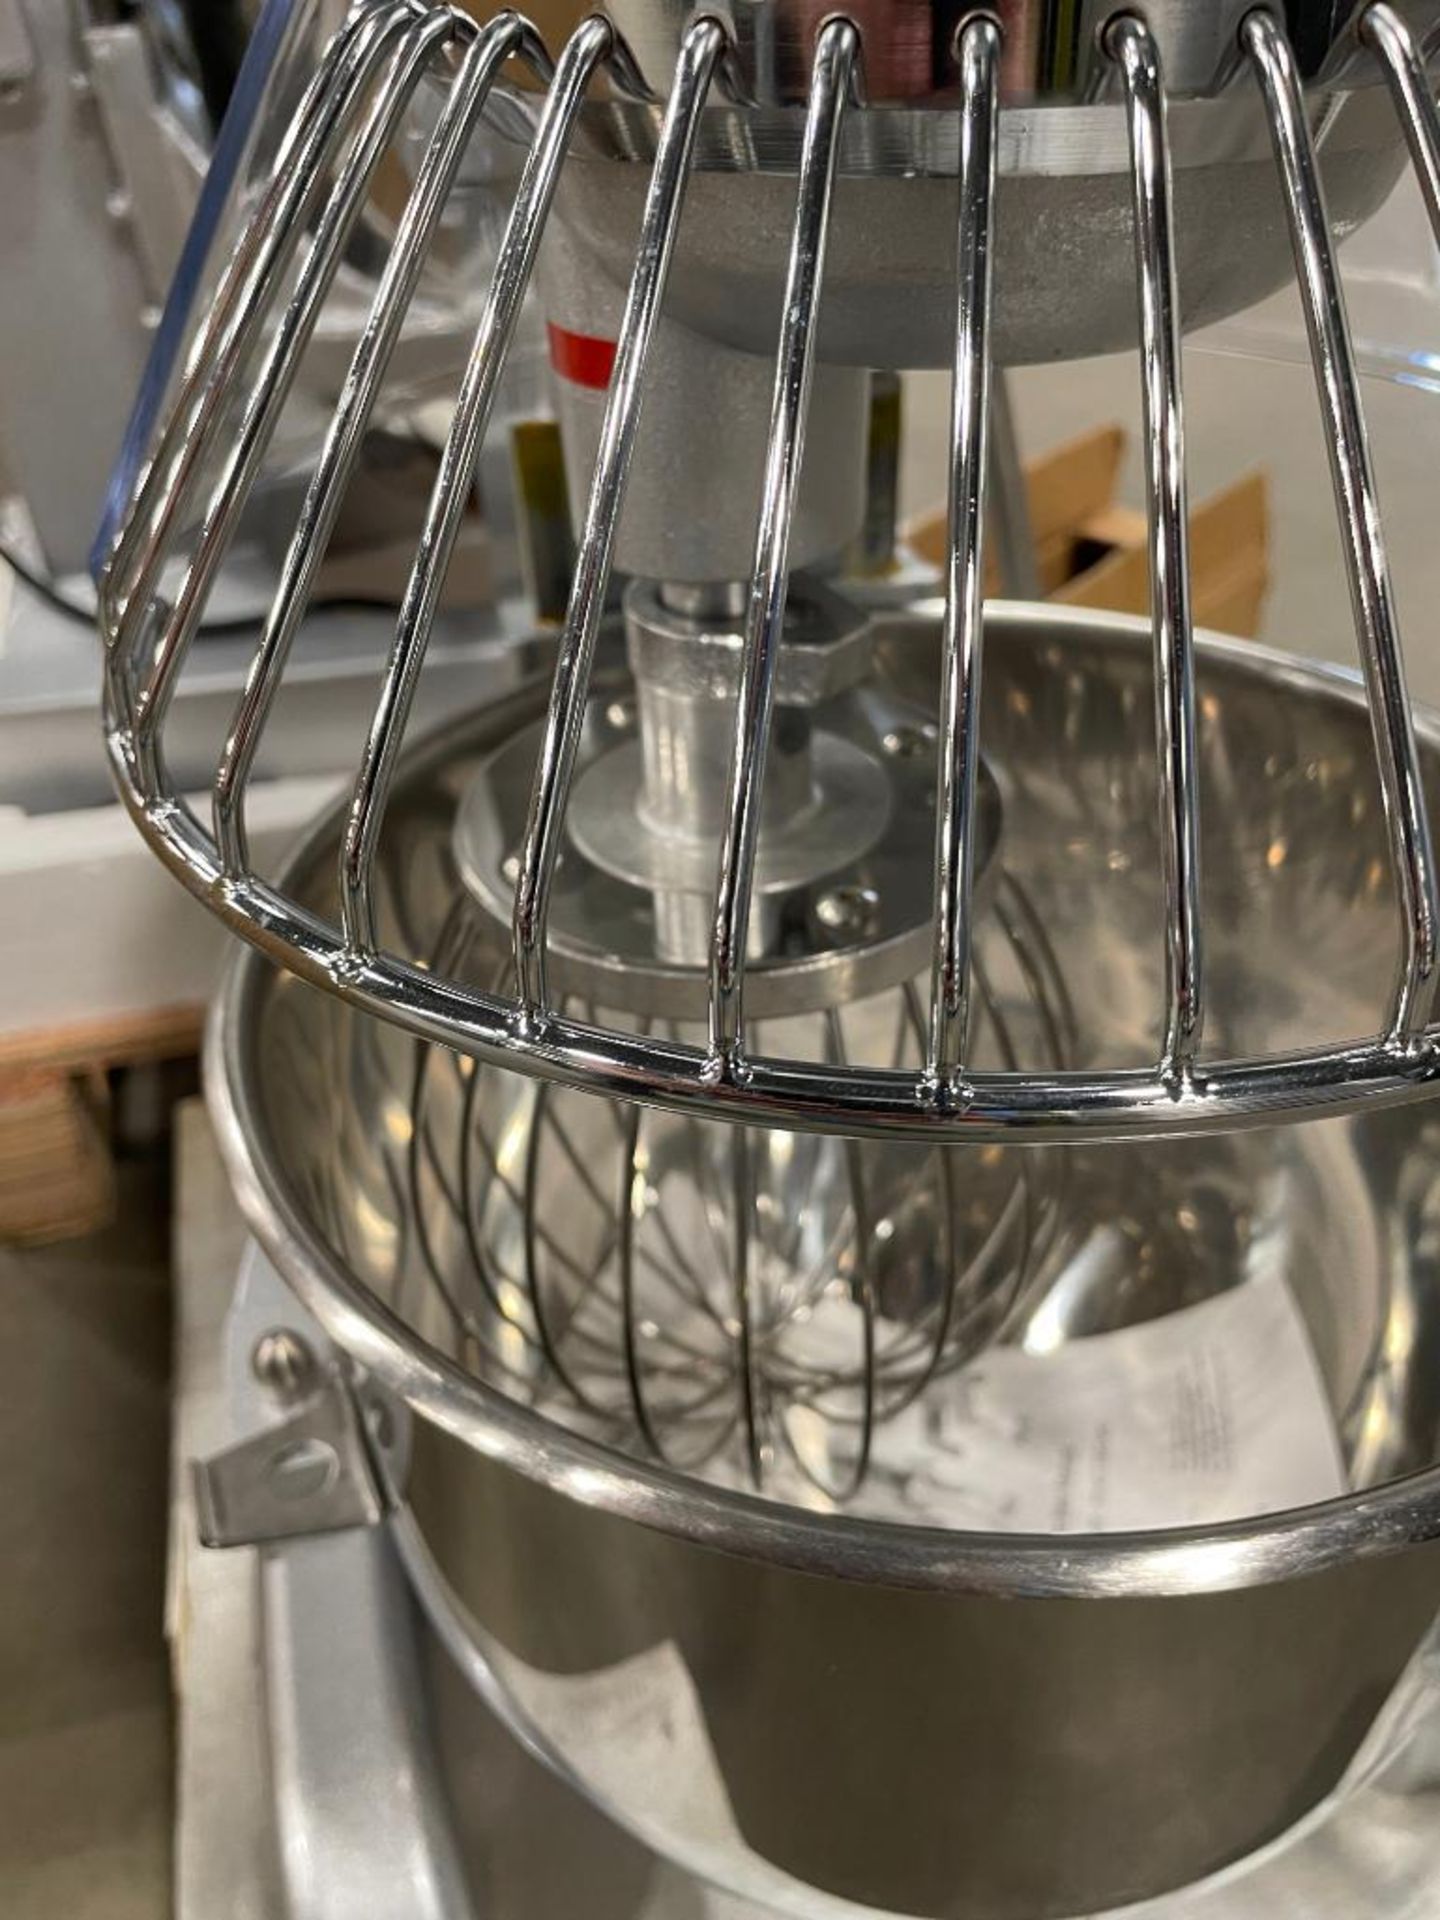 NEW PRIMO 10 QT COMMERCIAL STAND MIXER - Image 6 of 12